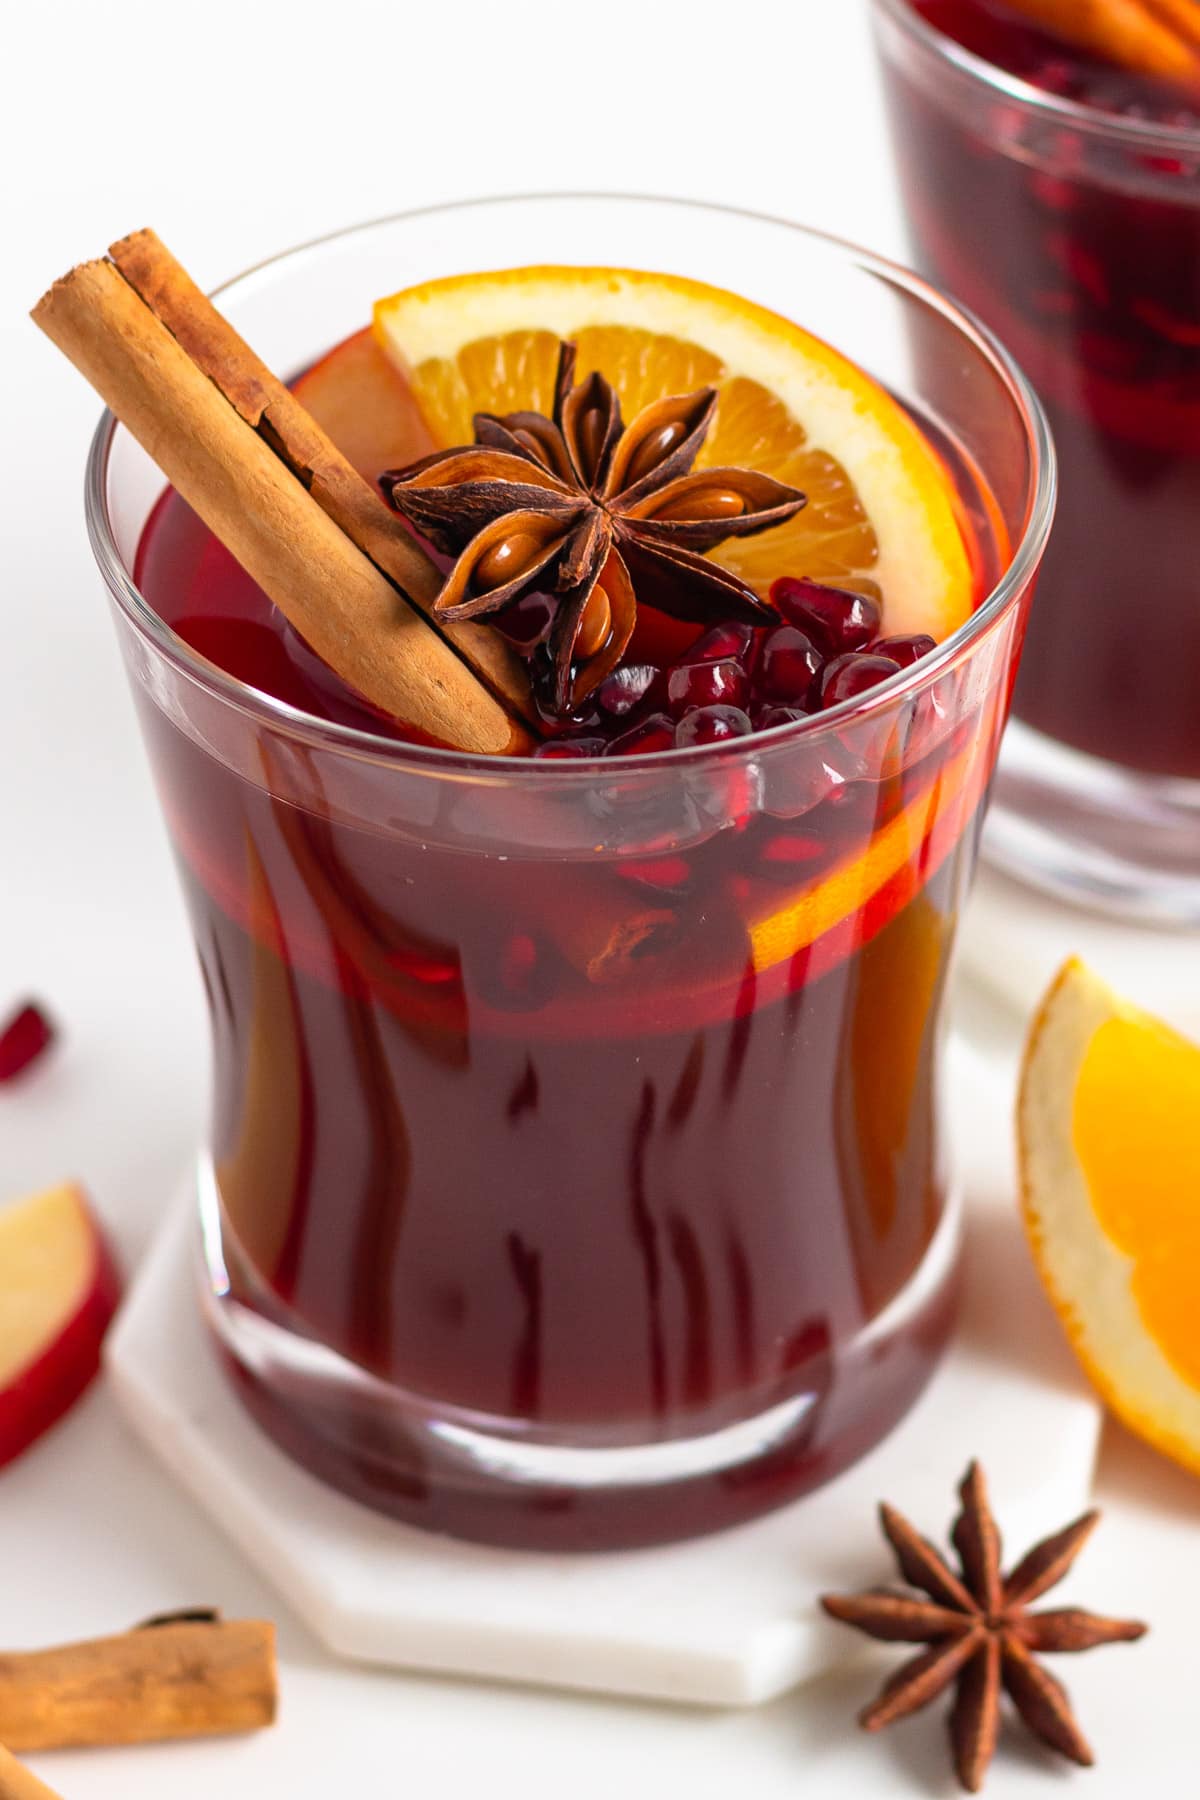 Glass of Kinderpunsch (alcohol free mulled wine).